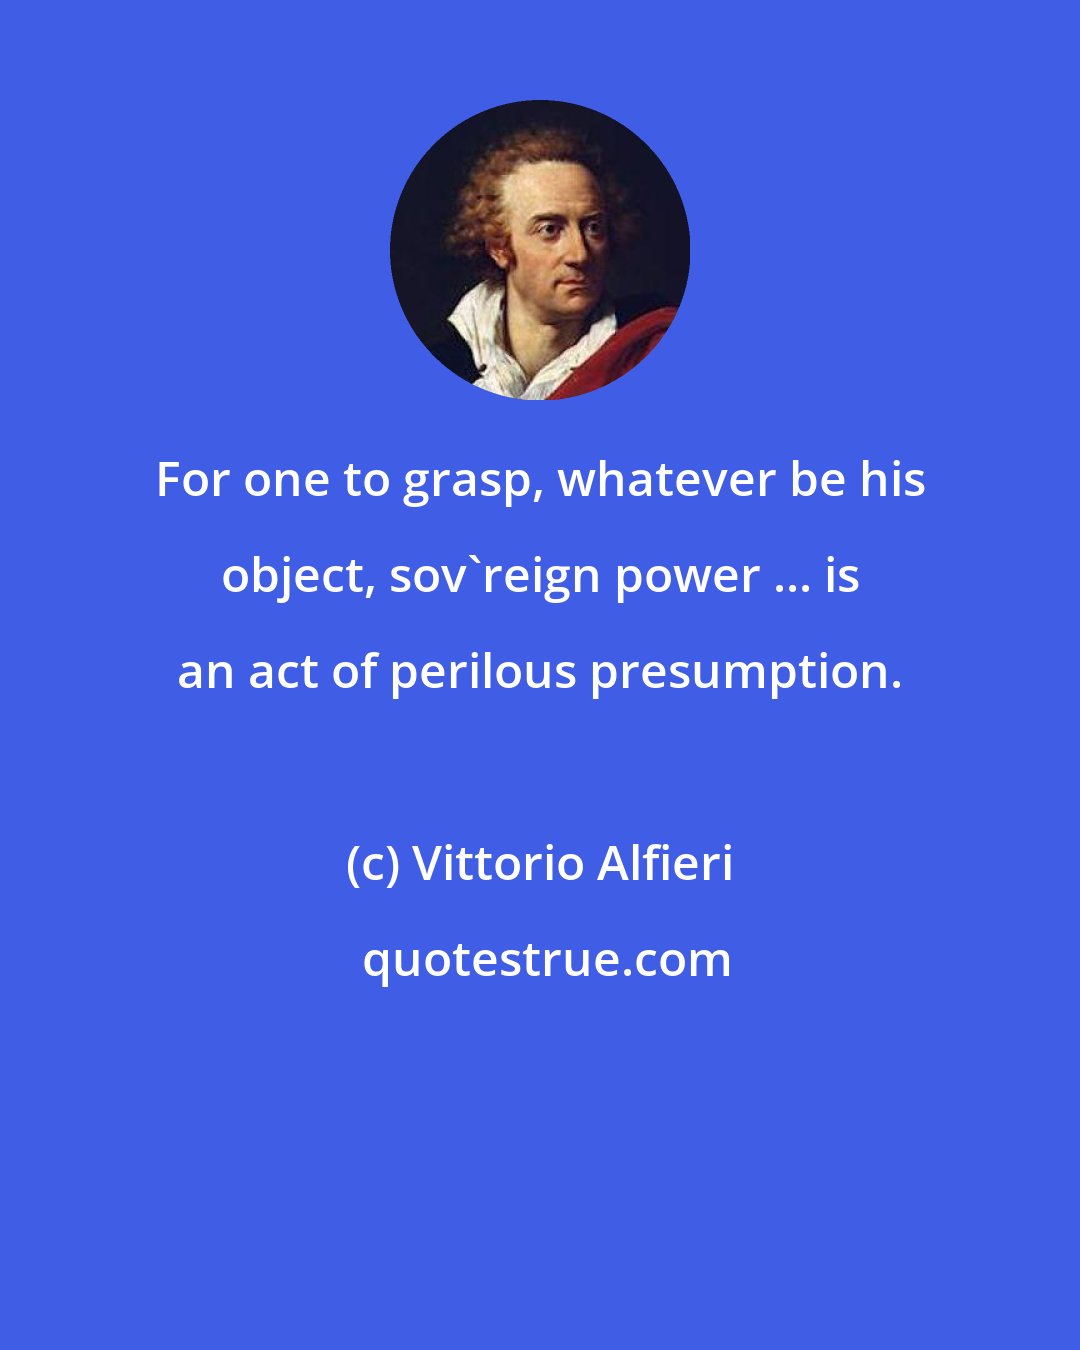 Vittorio Alfieri: For one to grasp, whatever be his object, sov'reign power ... is an act of perilous presumption.